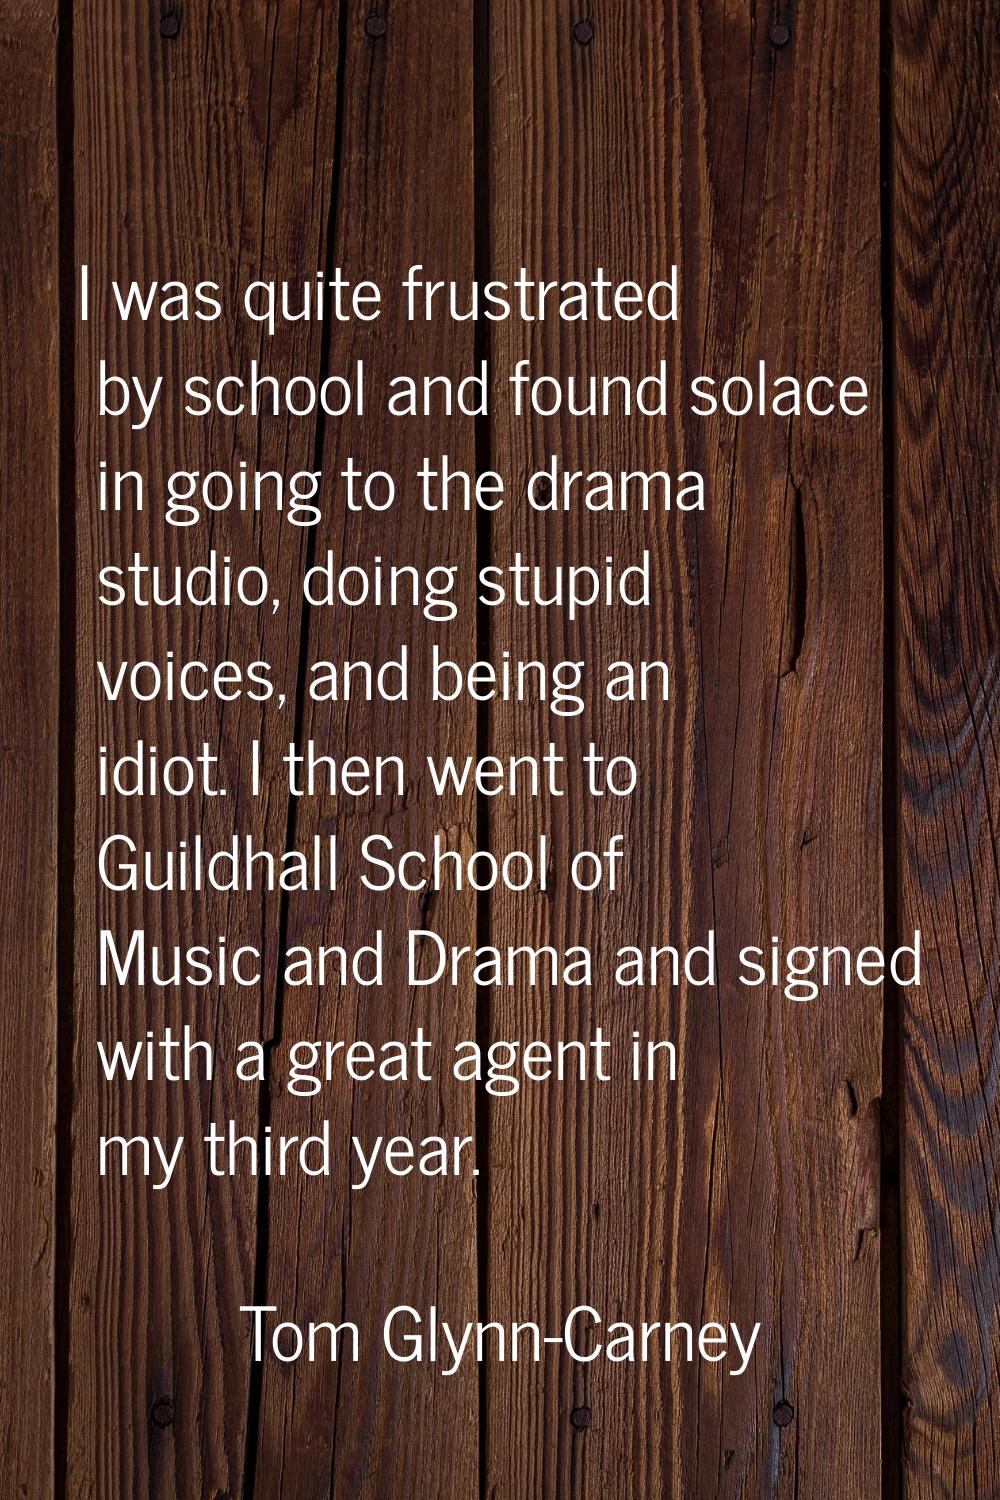 I was quite frustrated by school and found solace in going to the drama studio, doing stupid voices